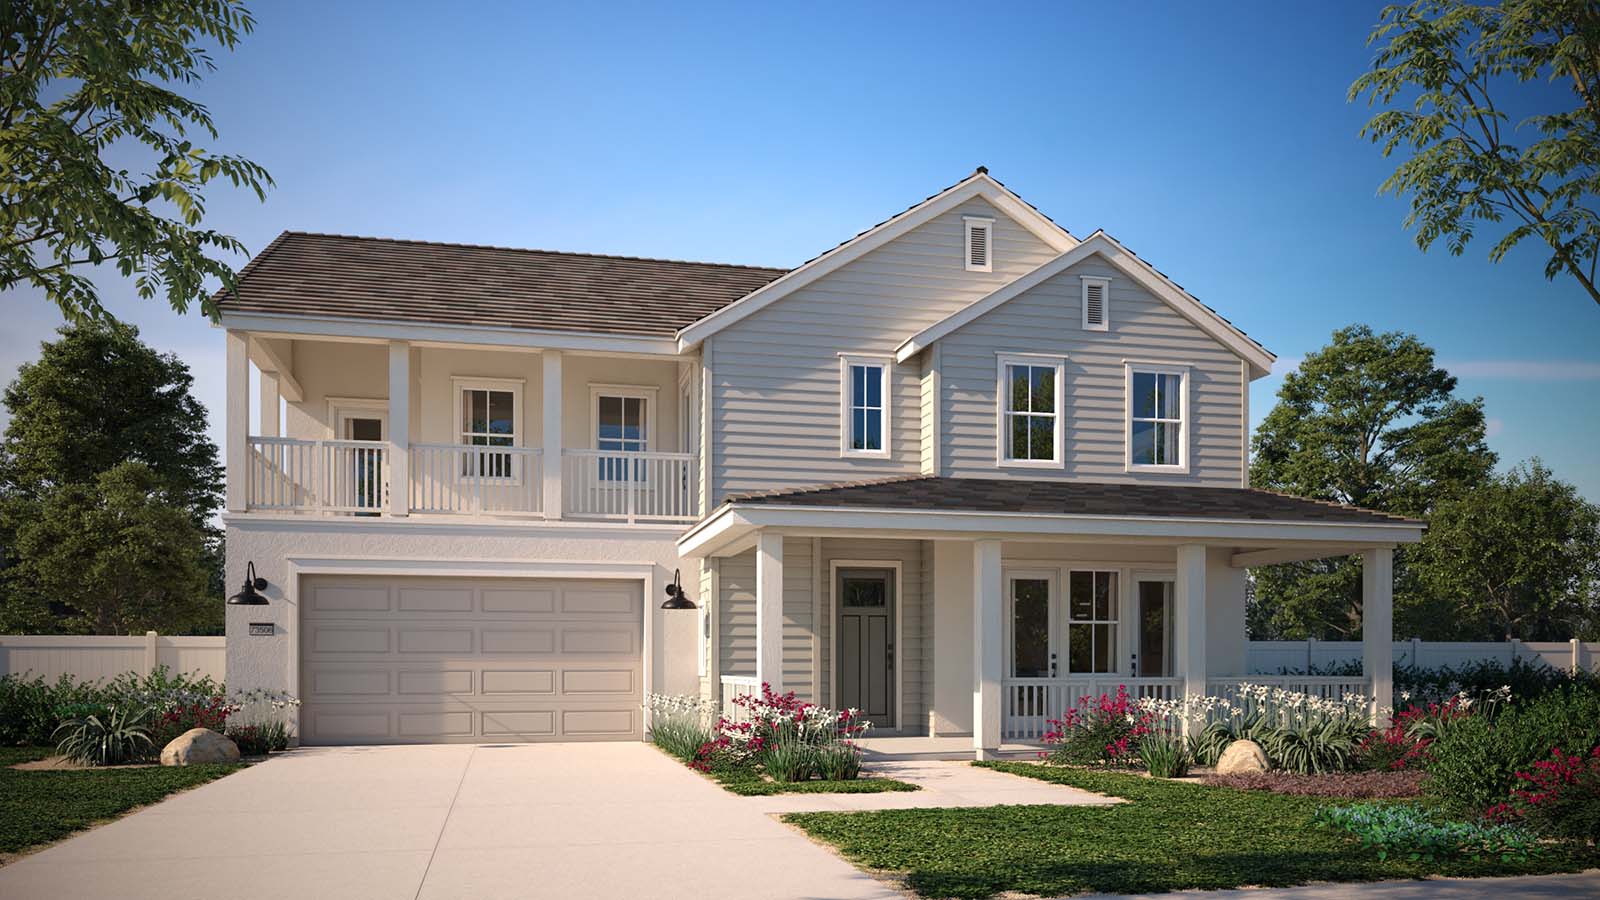 Exterior Elevation C - Plan Four - Upton at Sommers Bend